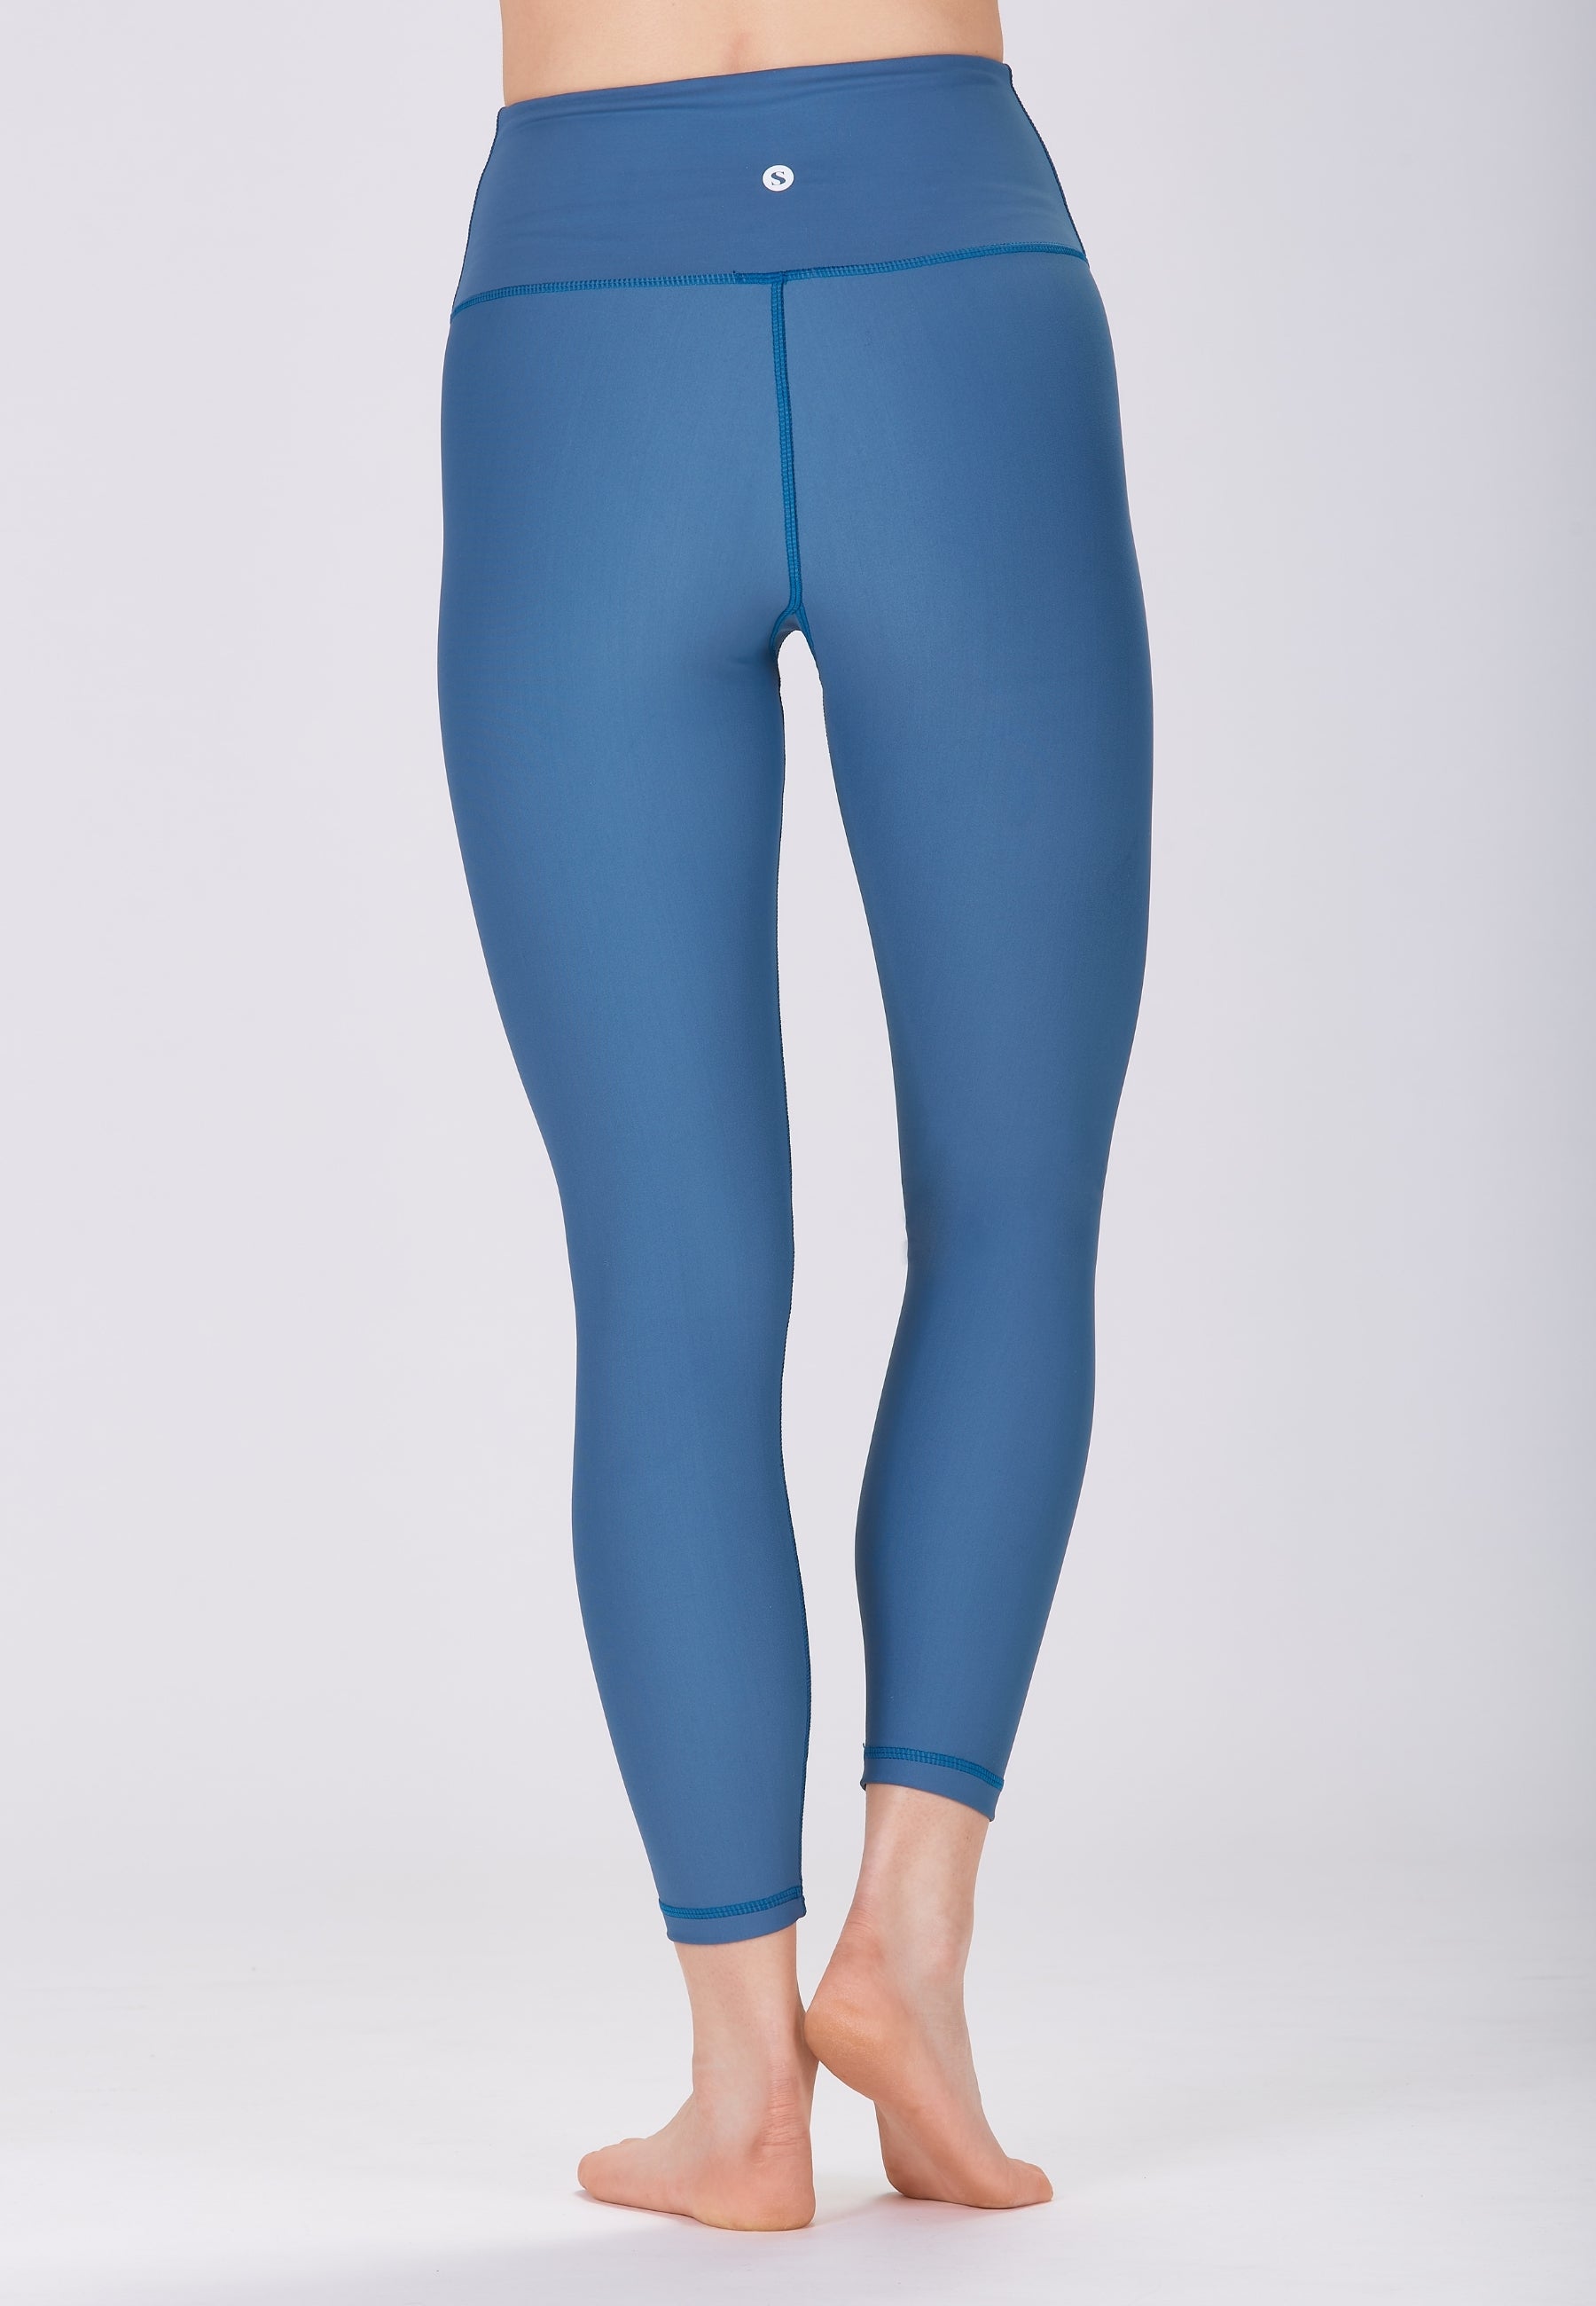 Sisterly Tribe - Classic 7/8 Tights Pine Blue. Buttery soft & Body sculpting, Soft, matte fabric that feels like a second skin, Compression that follows your every move.